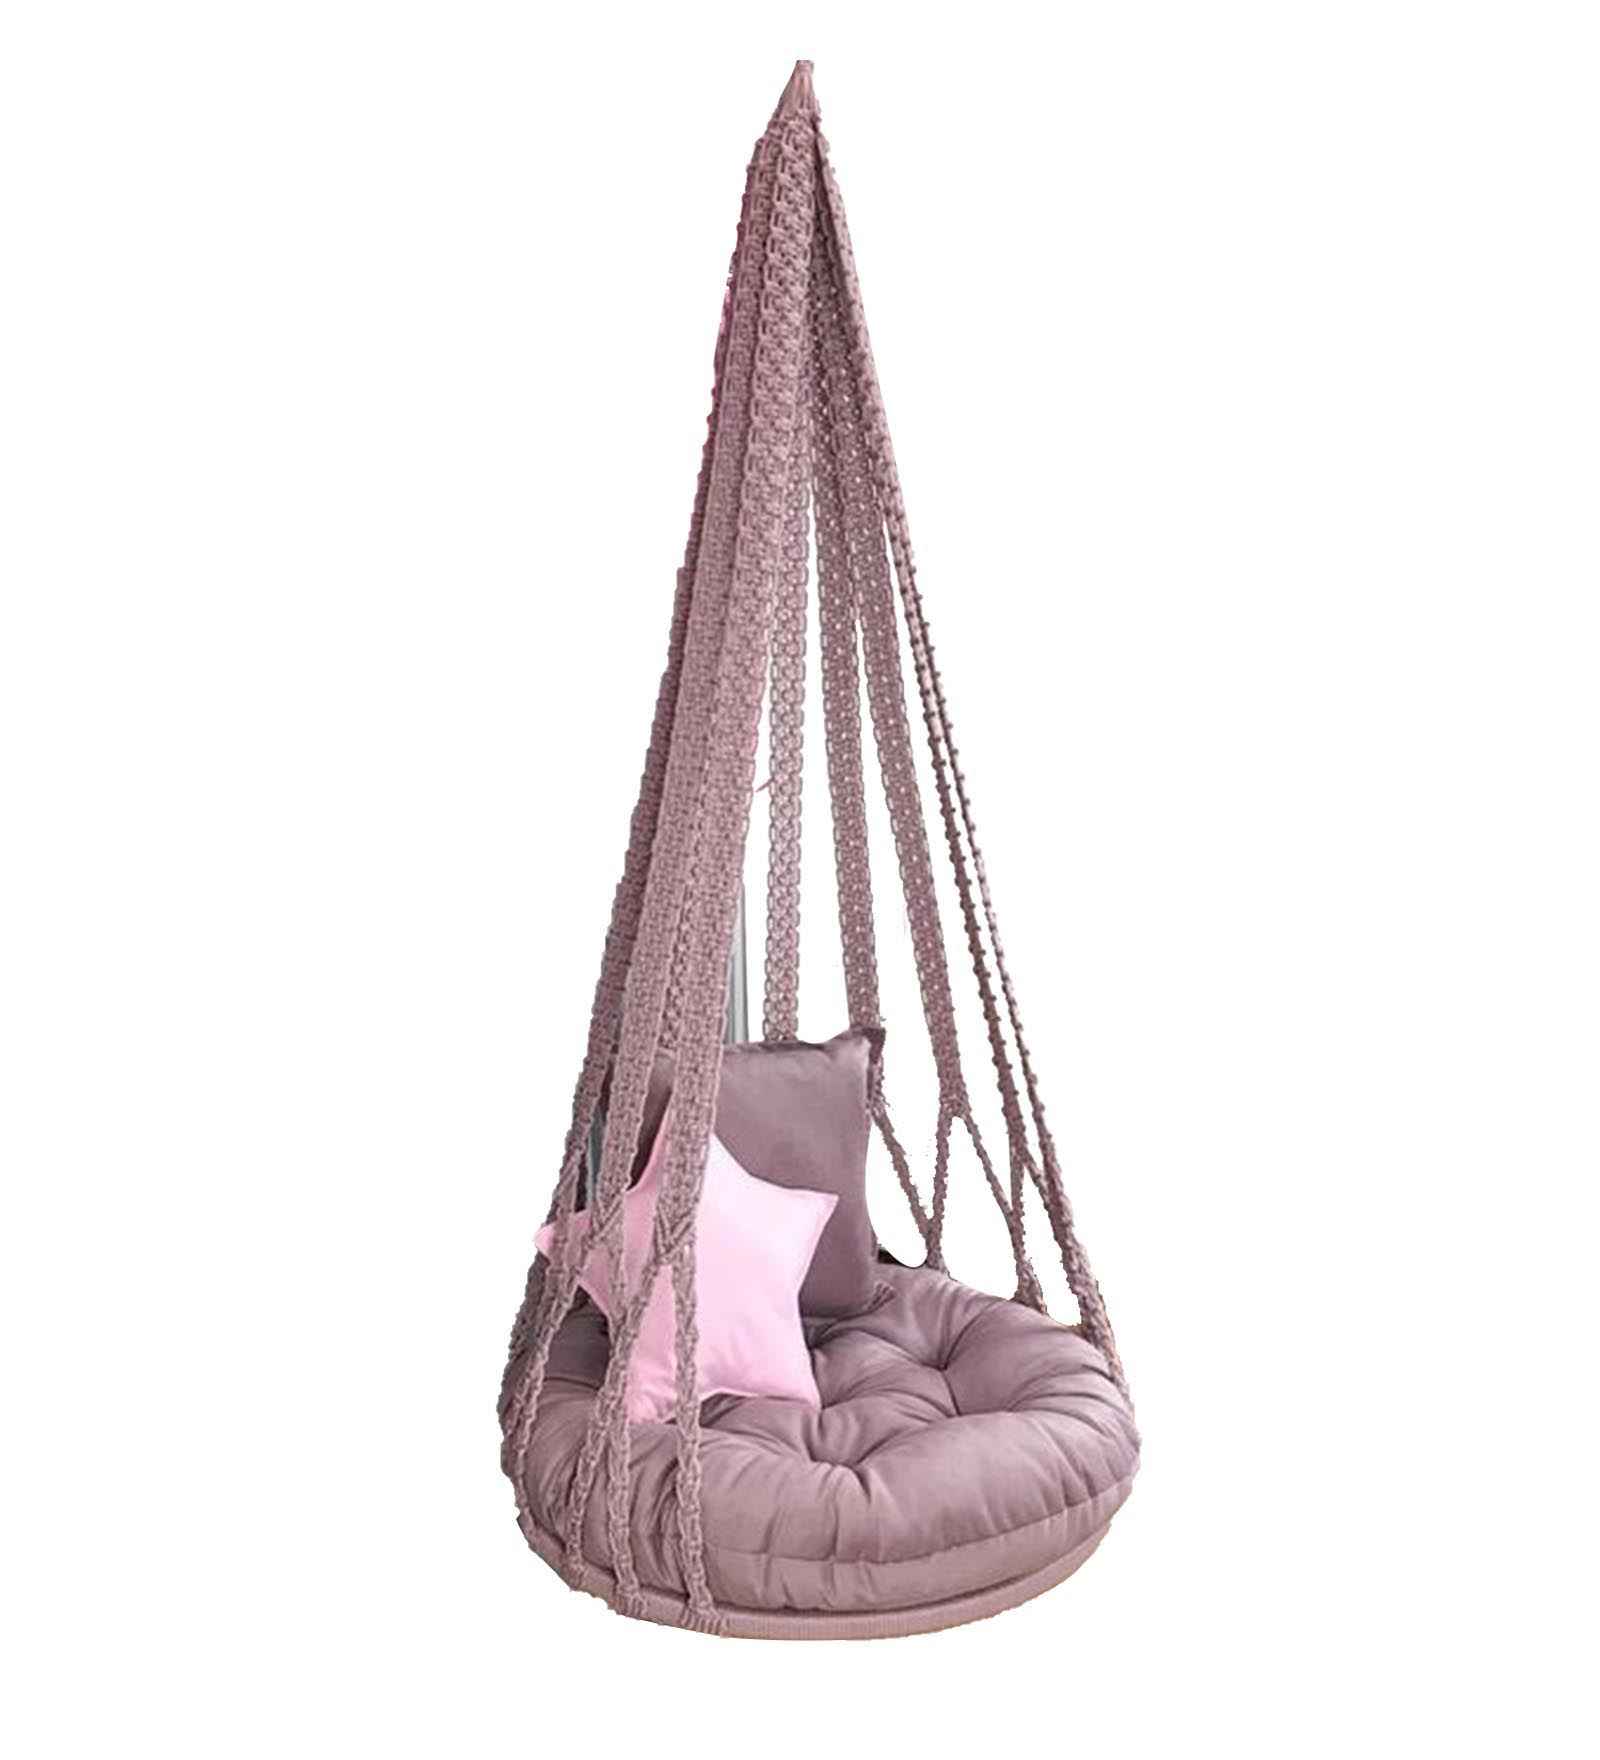 Kaahira Beautiful Hanging Nest Chair for Kids and Adults in Wine Color